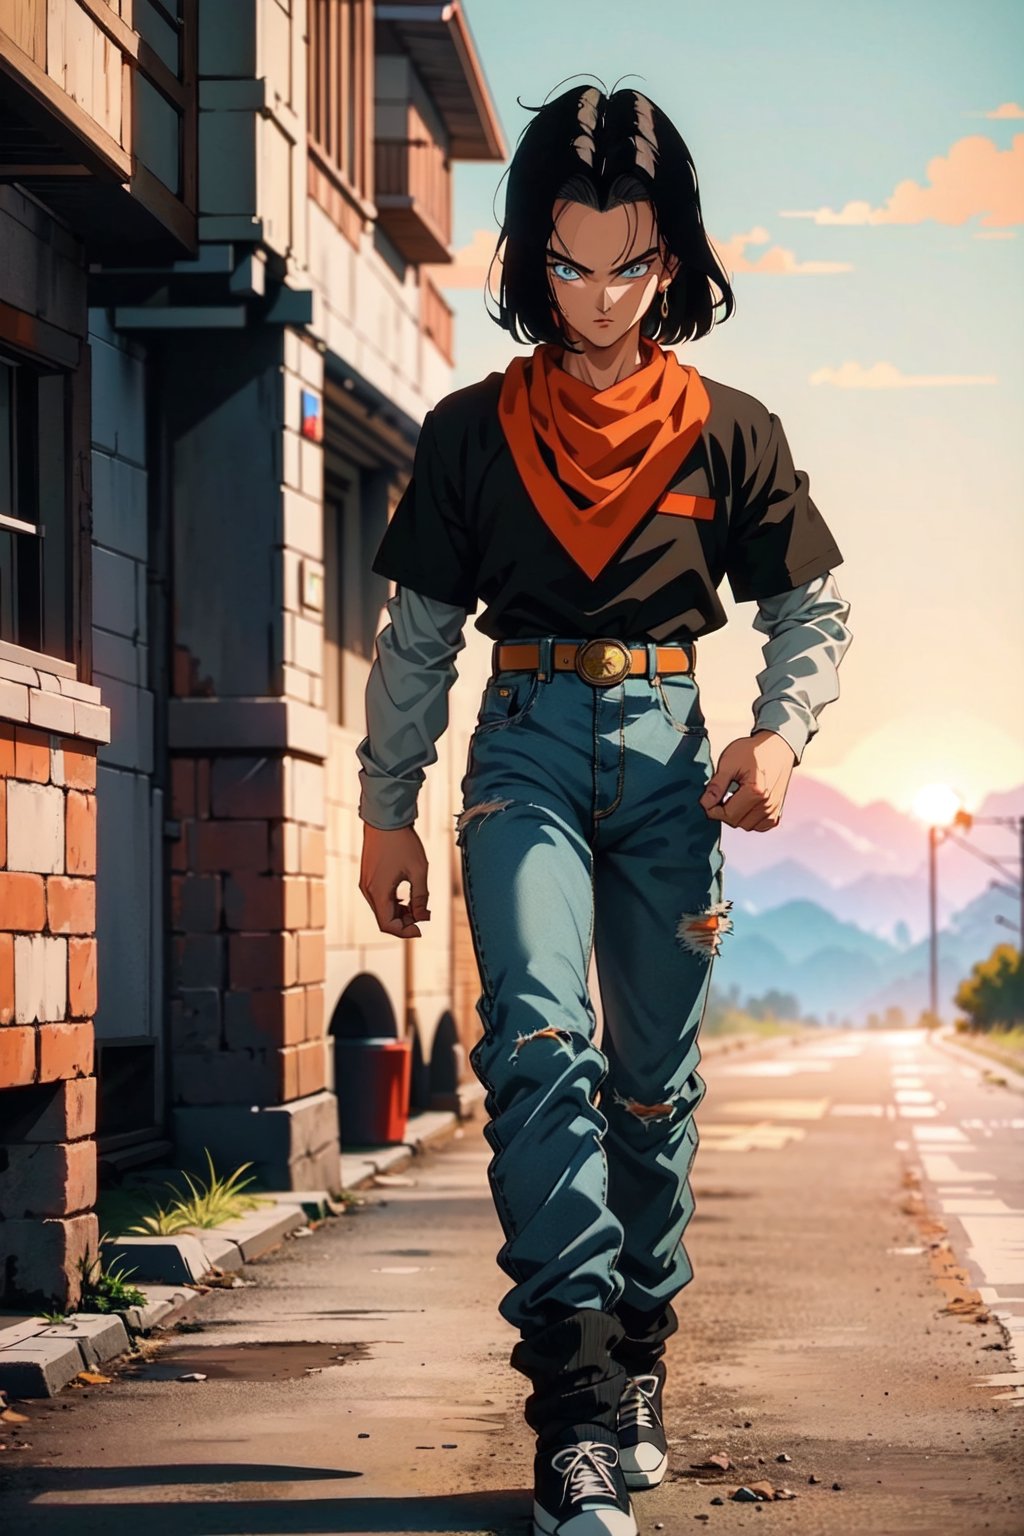 android 17, blue eyes, black hair,parted hair,short hair, black shirt, jeans, layered shirt, white sleeves,orange bandana, blue sneakers, green socks, brown belt, red patch